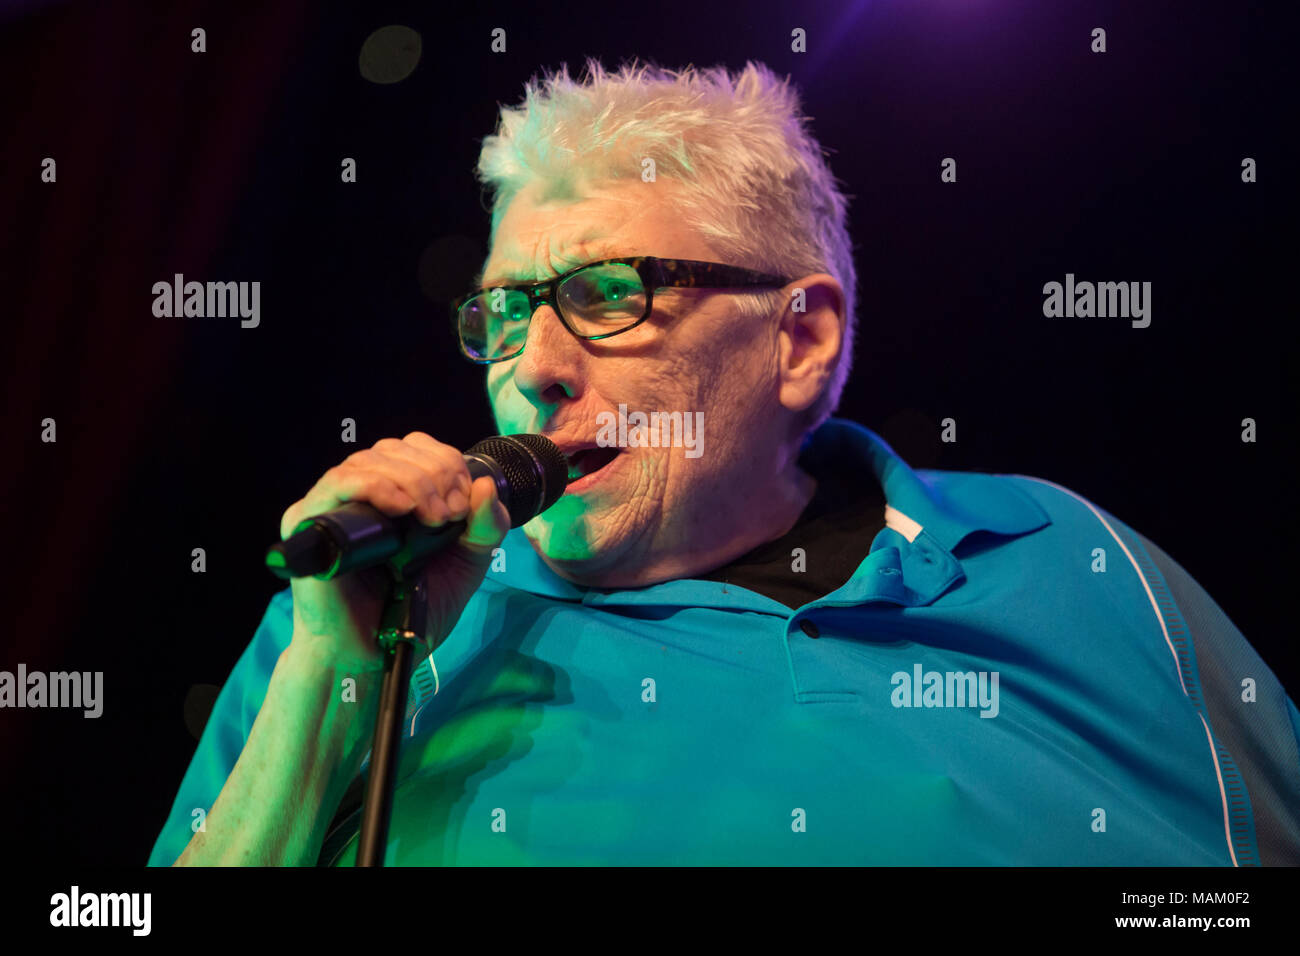 Nantwich Cheshire Uk 2nd April 18 Chris Farlowe Performs Live At The Nantwich Civic Hall As Part Of The Oh Boy It S The Non Stop Sixties Show During The 22nd Nantwich Jazz Blues